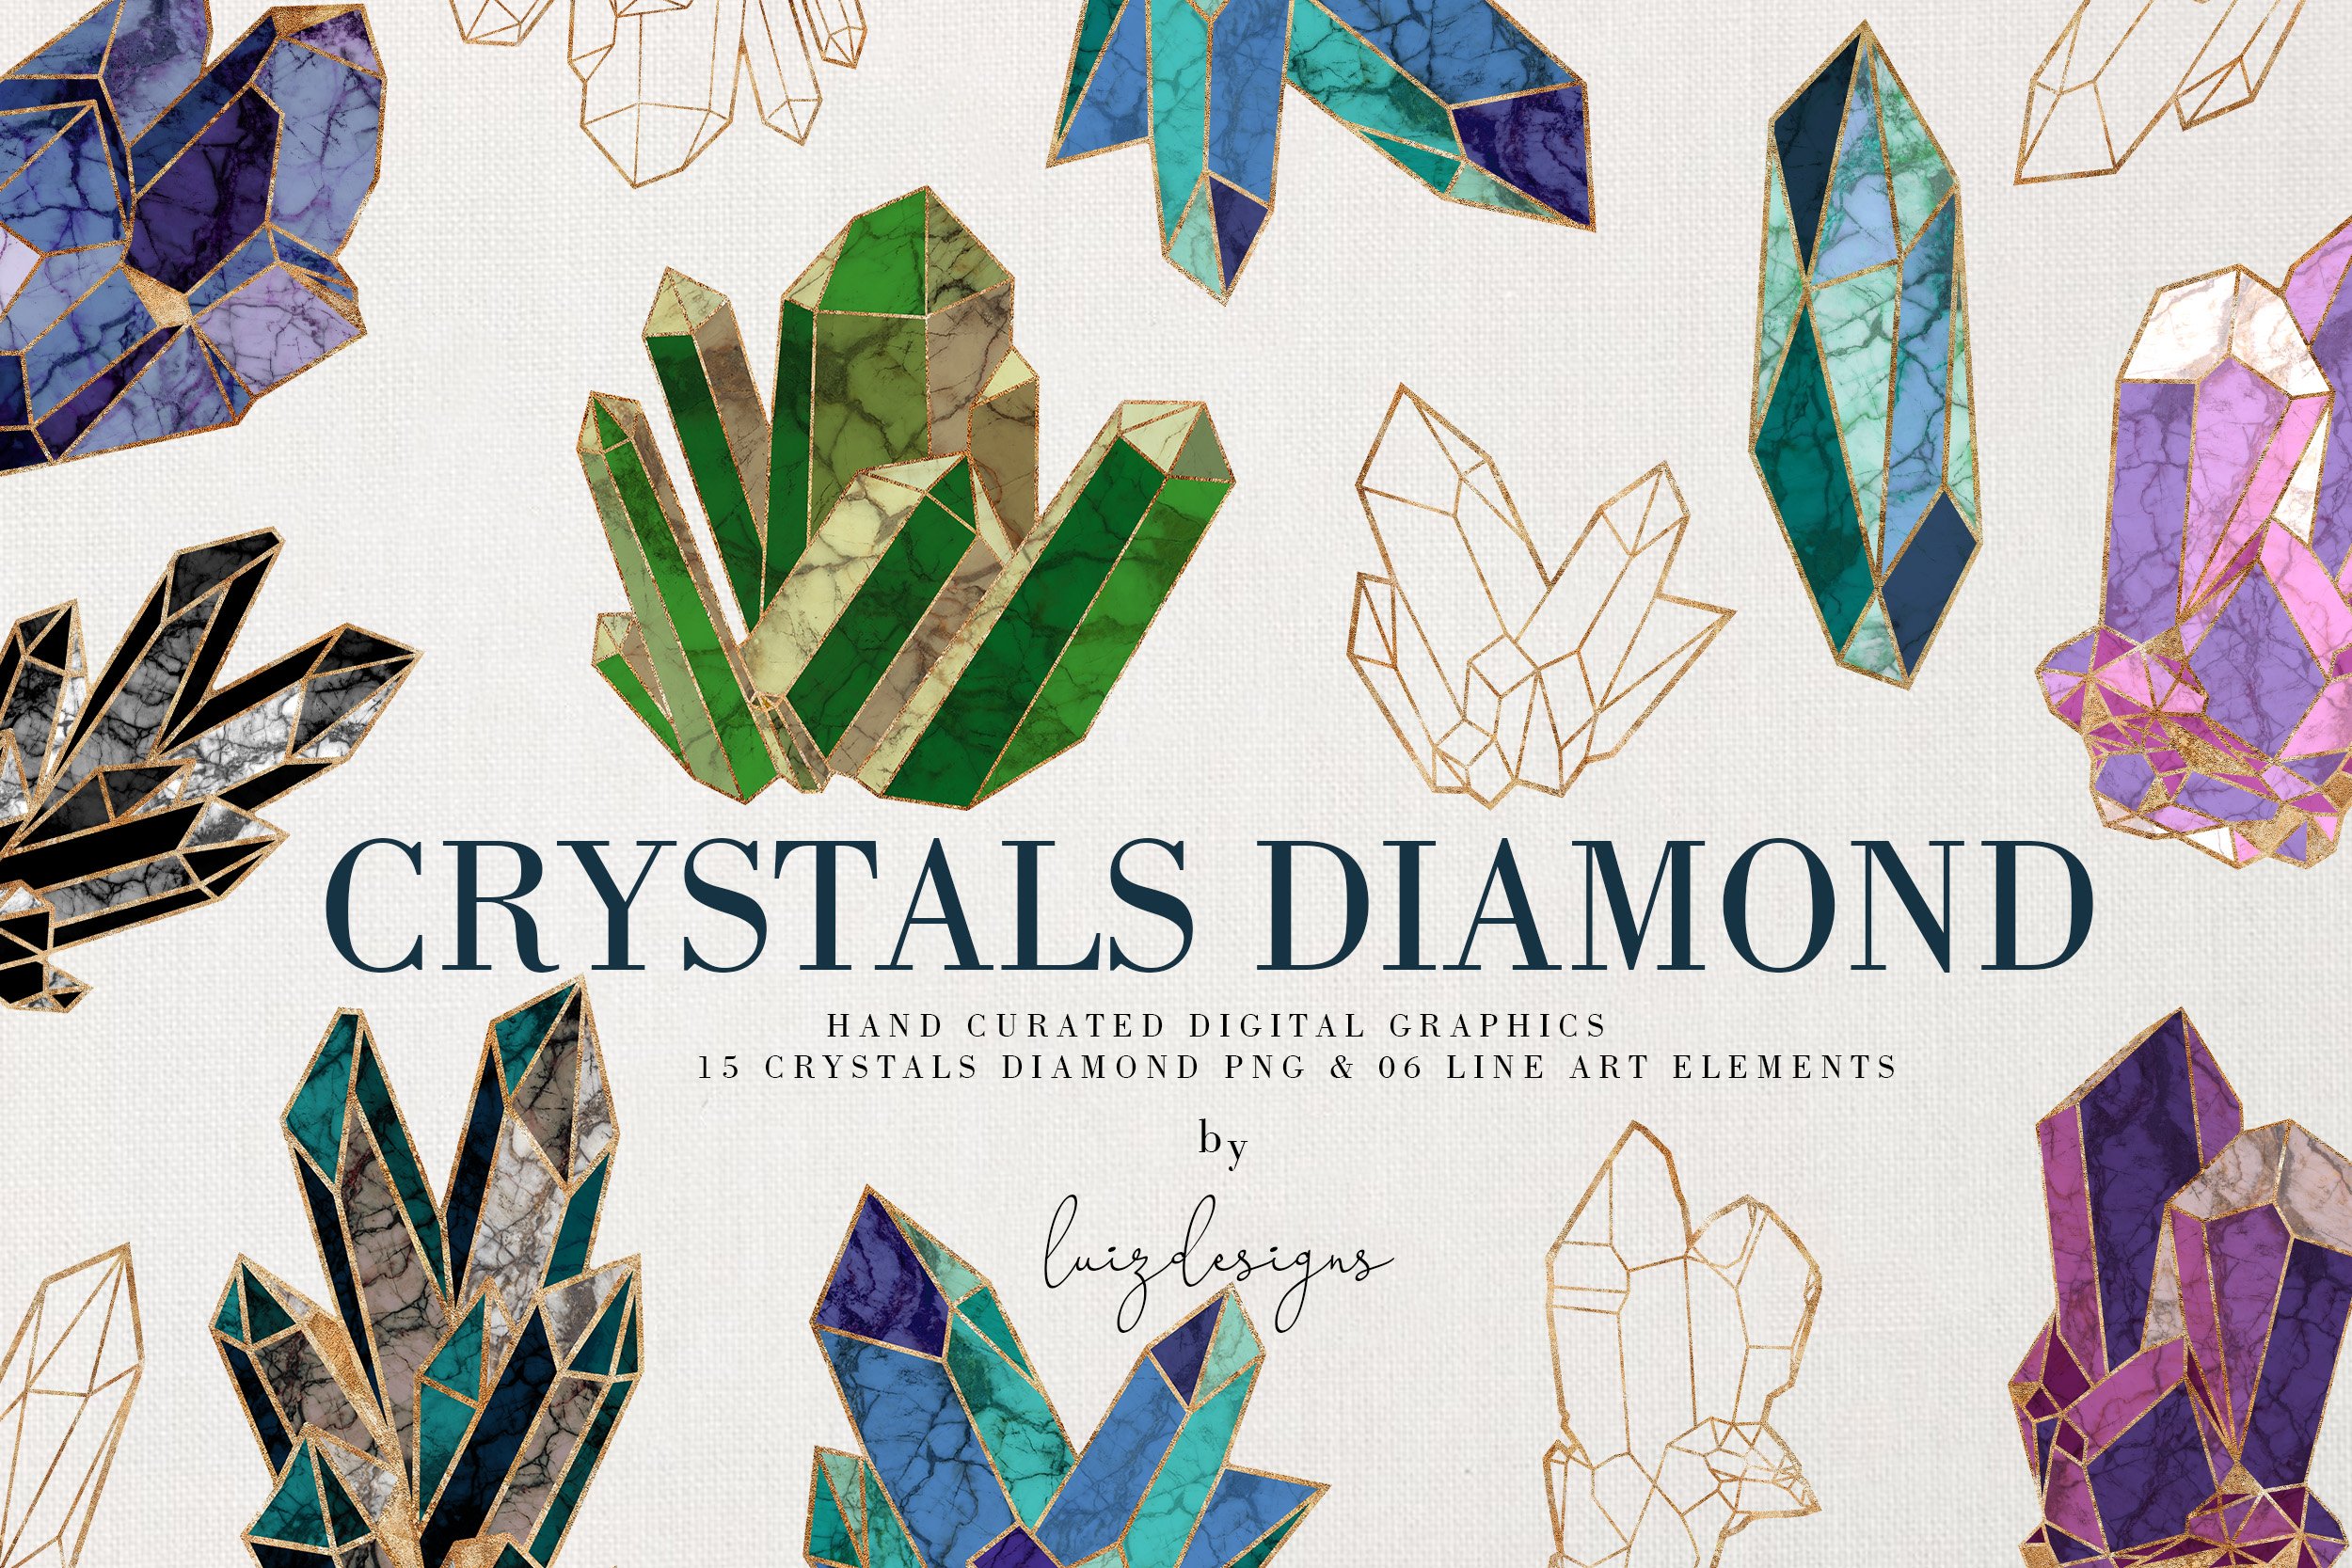 Crystals Diamond cover image.